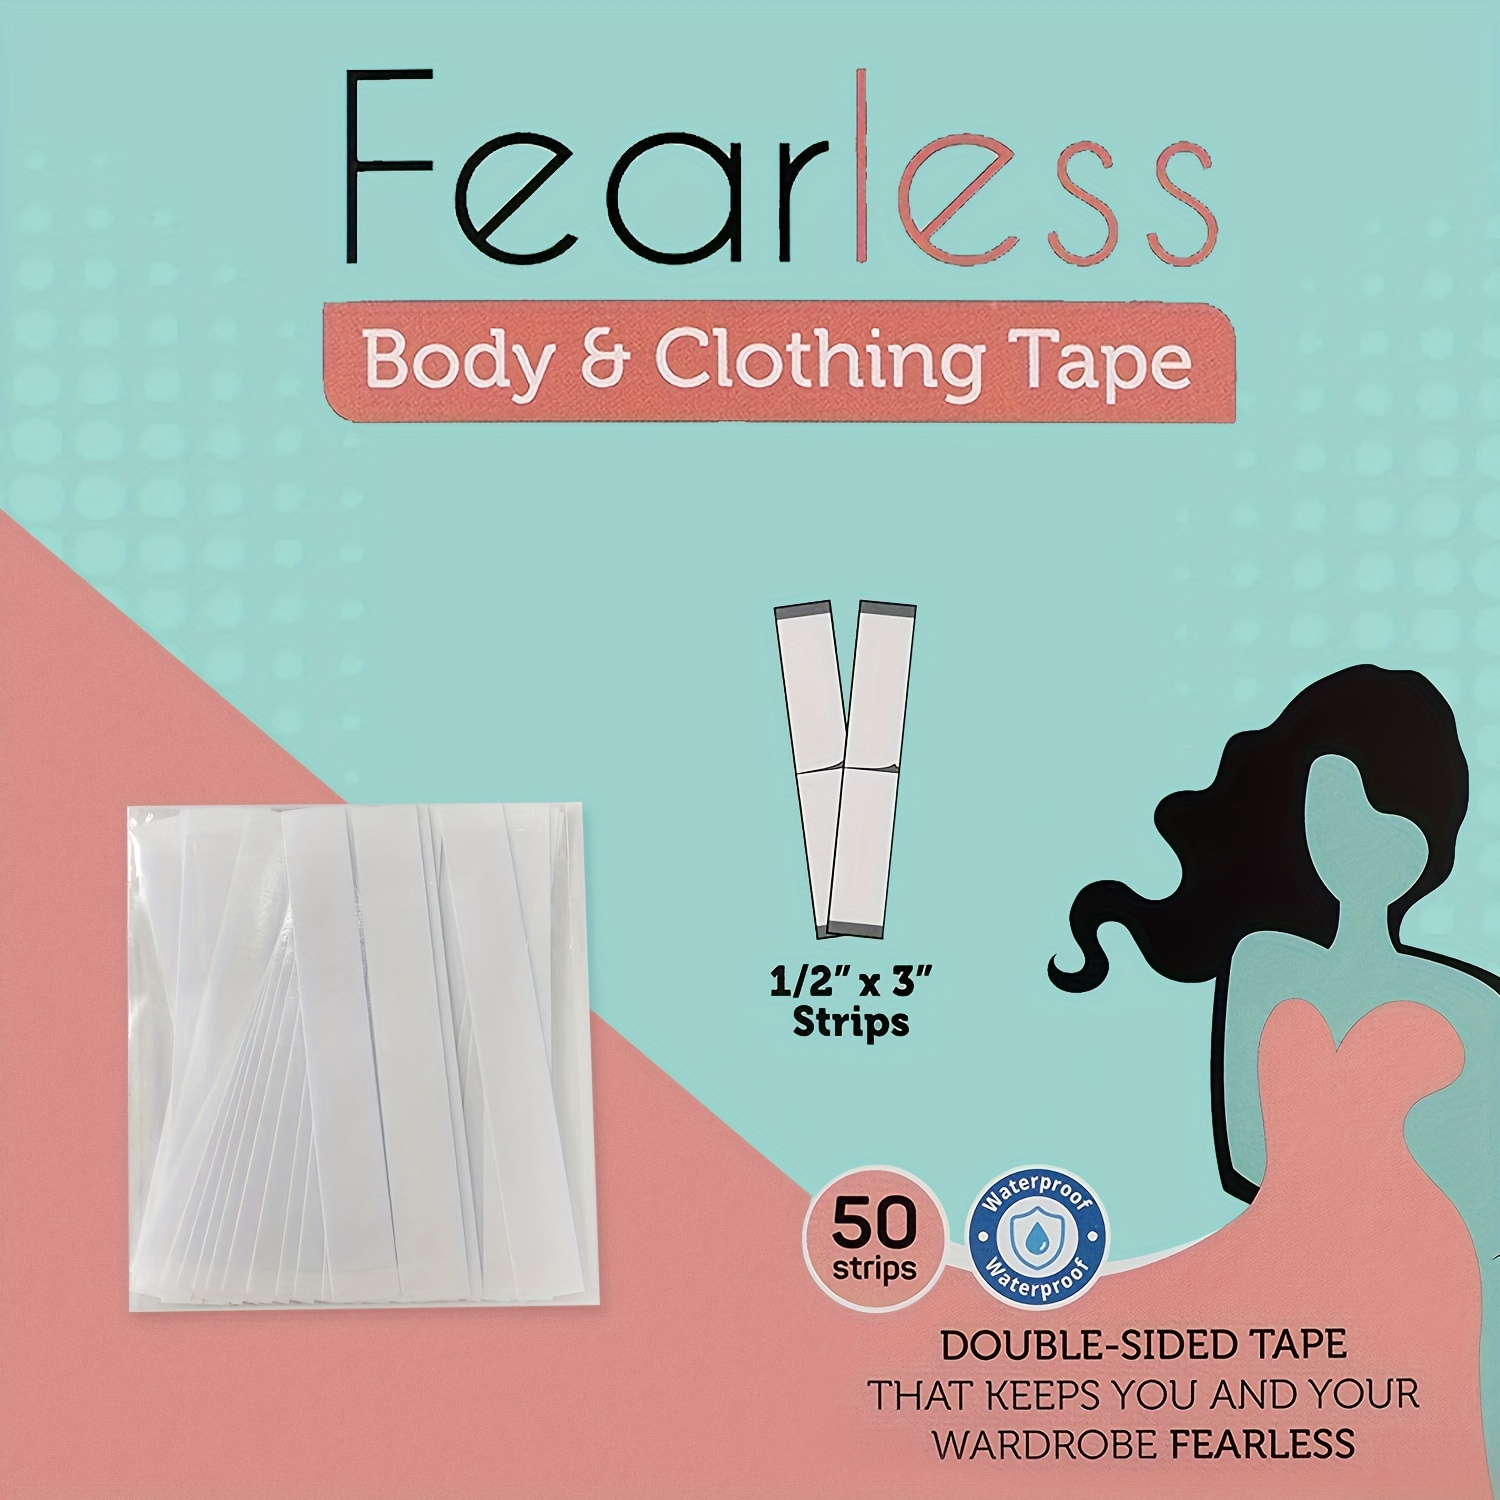 Fabric Tape For Clothes Transparent Lingerie Body Tape 50pcs Invisible And  Clear Tape Adhesive For Dresses - AliExpress